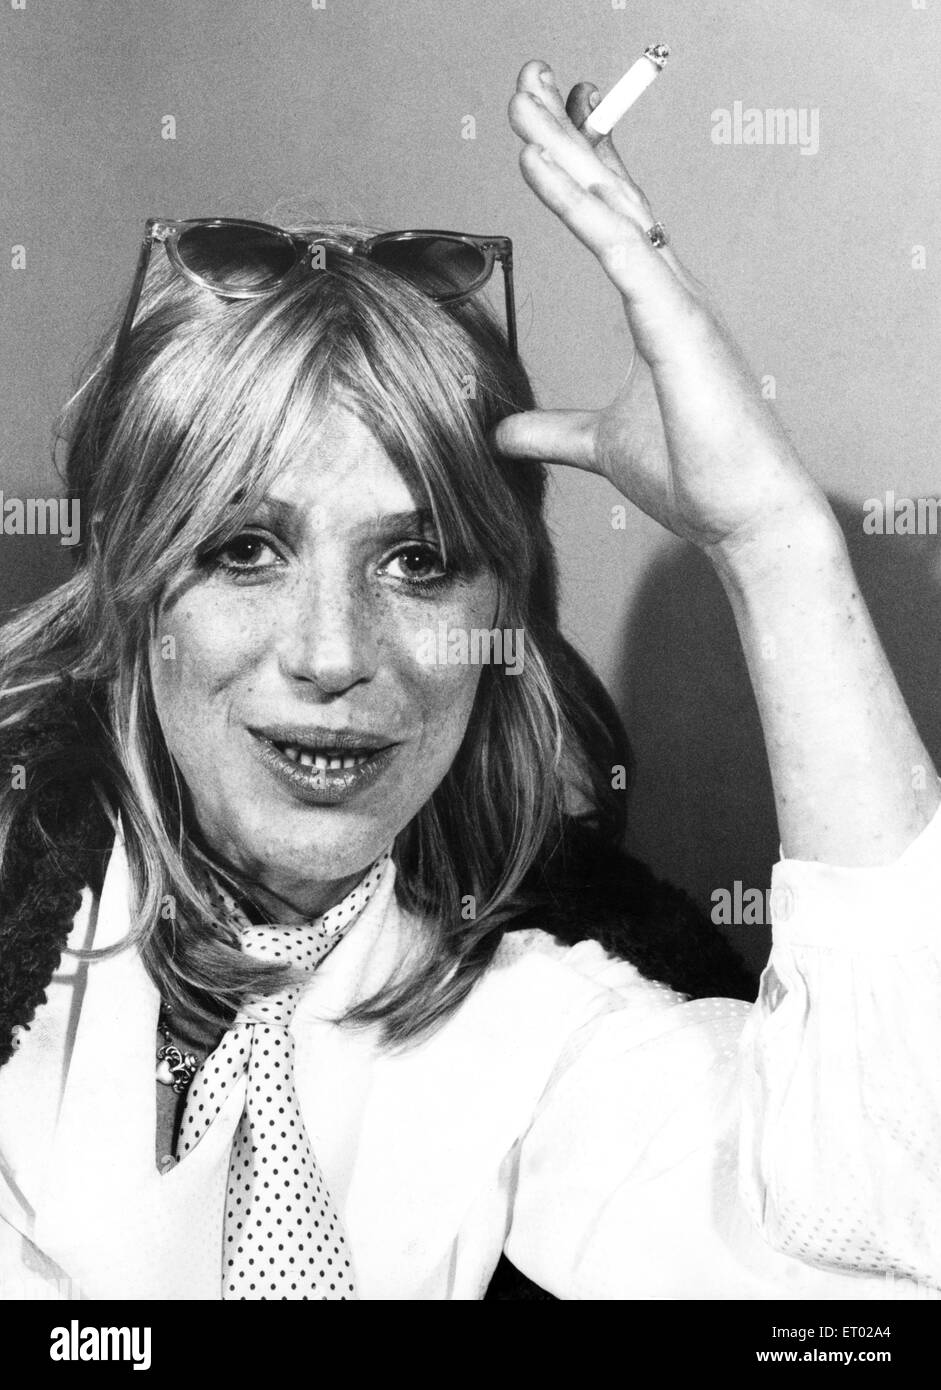 Marianne Faithfull promotes her new single 'The Ballad of Lucy Jordan' at the London offices of her record company. 11th December 1979. Stock Photo